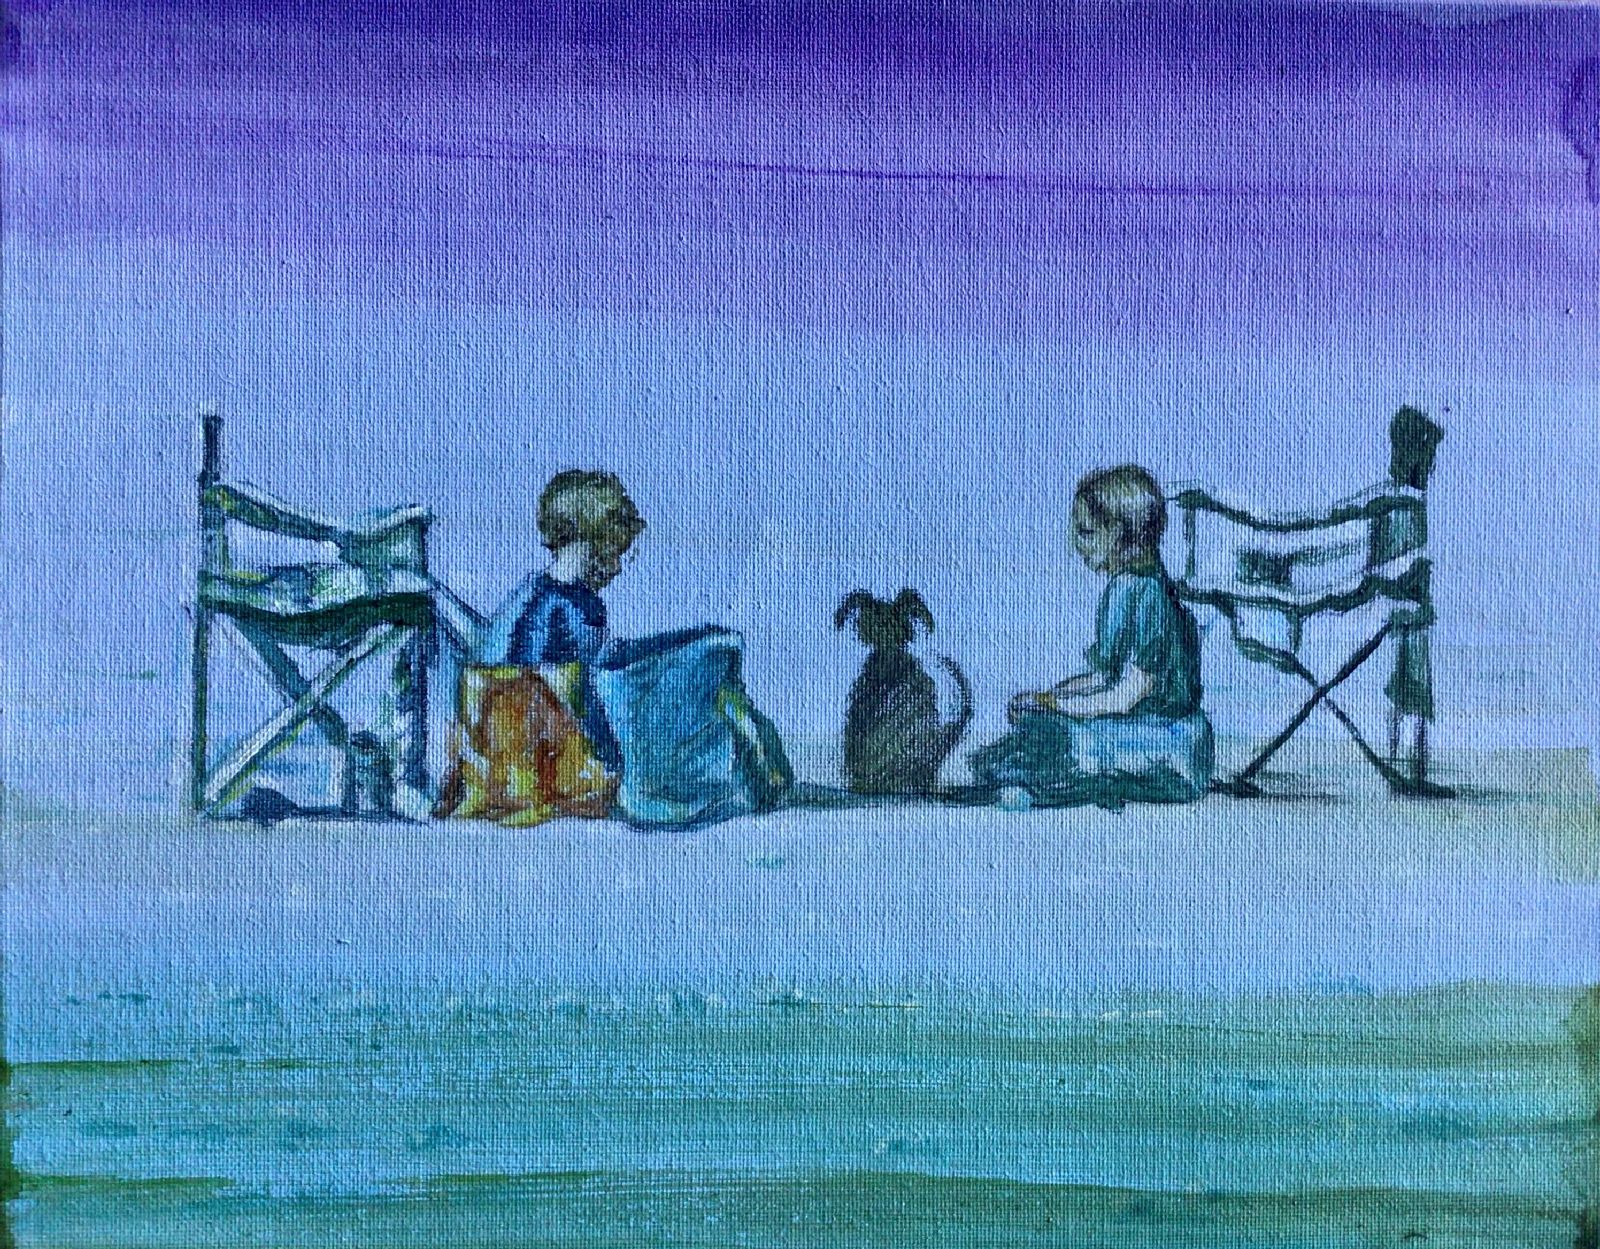 Waiting for mum, Beach Picnic by Christopher Banahan